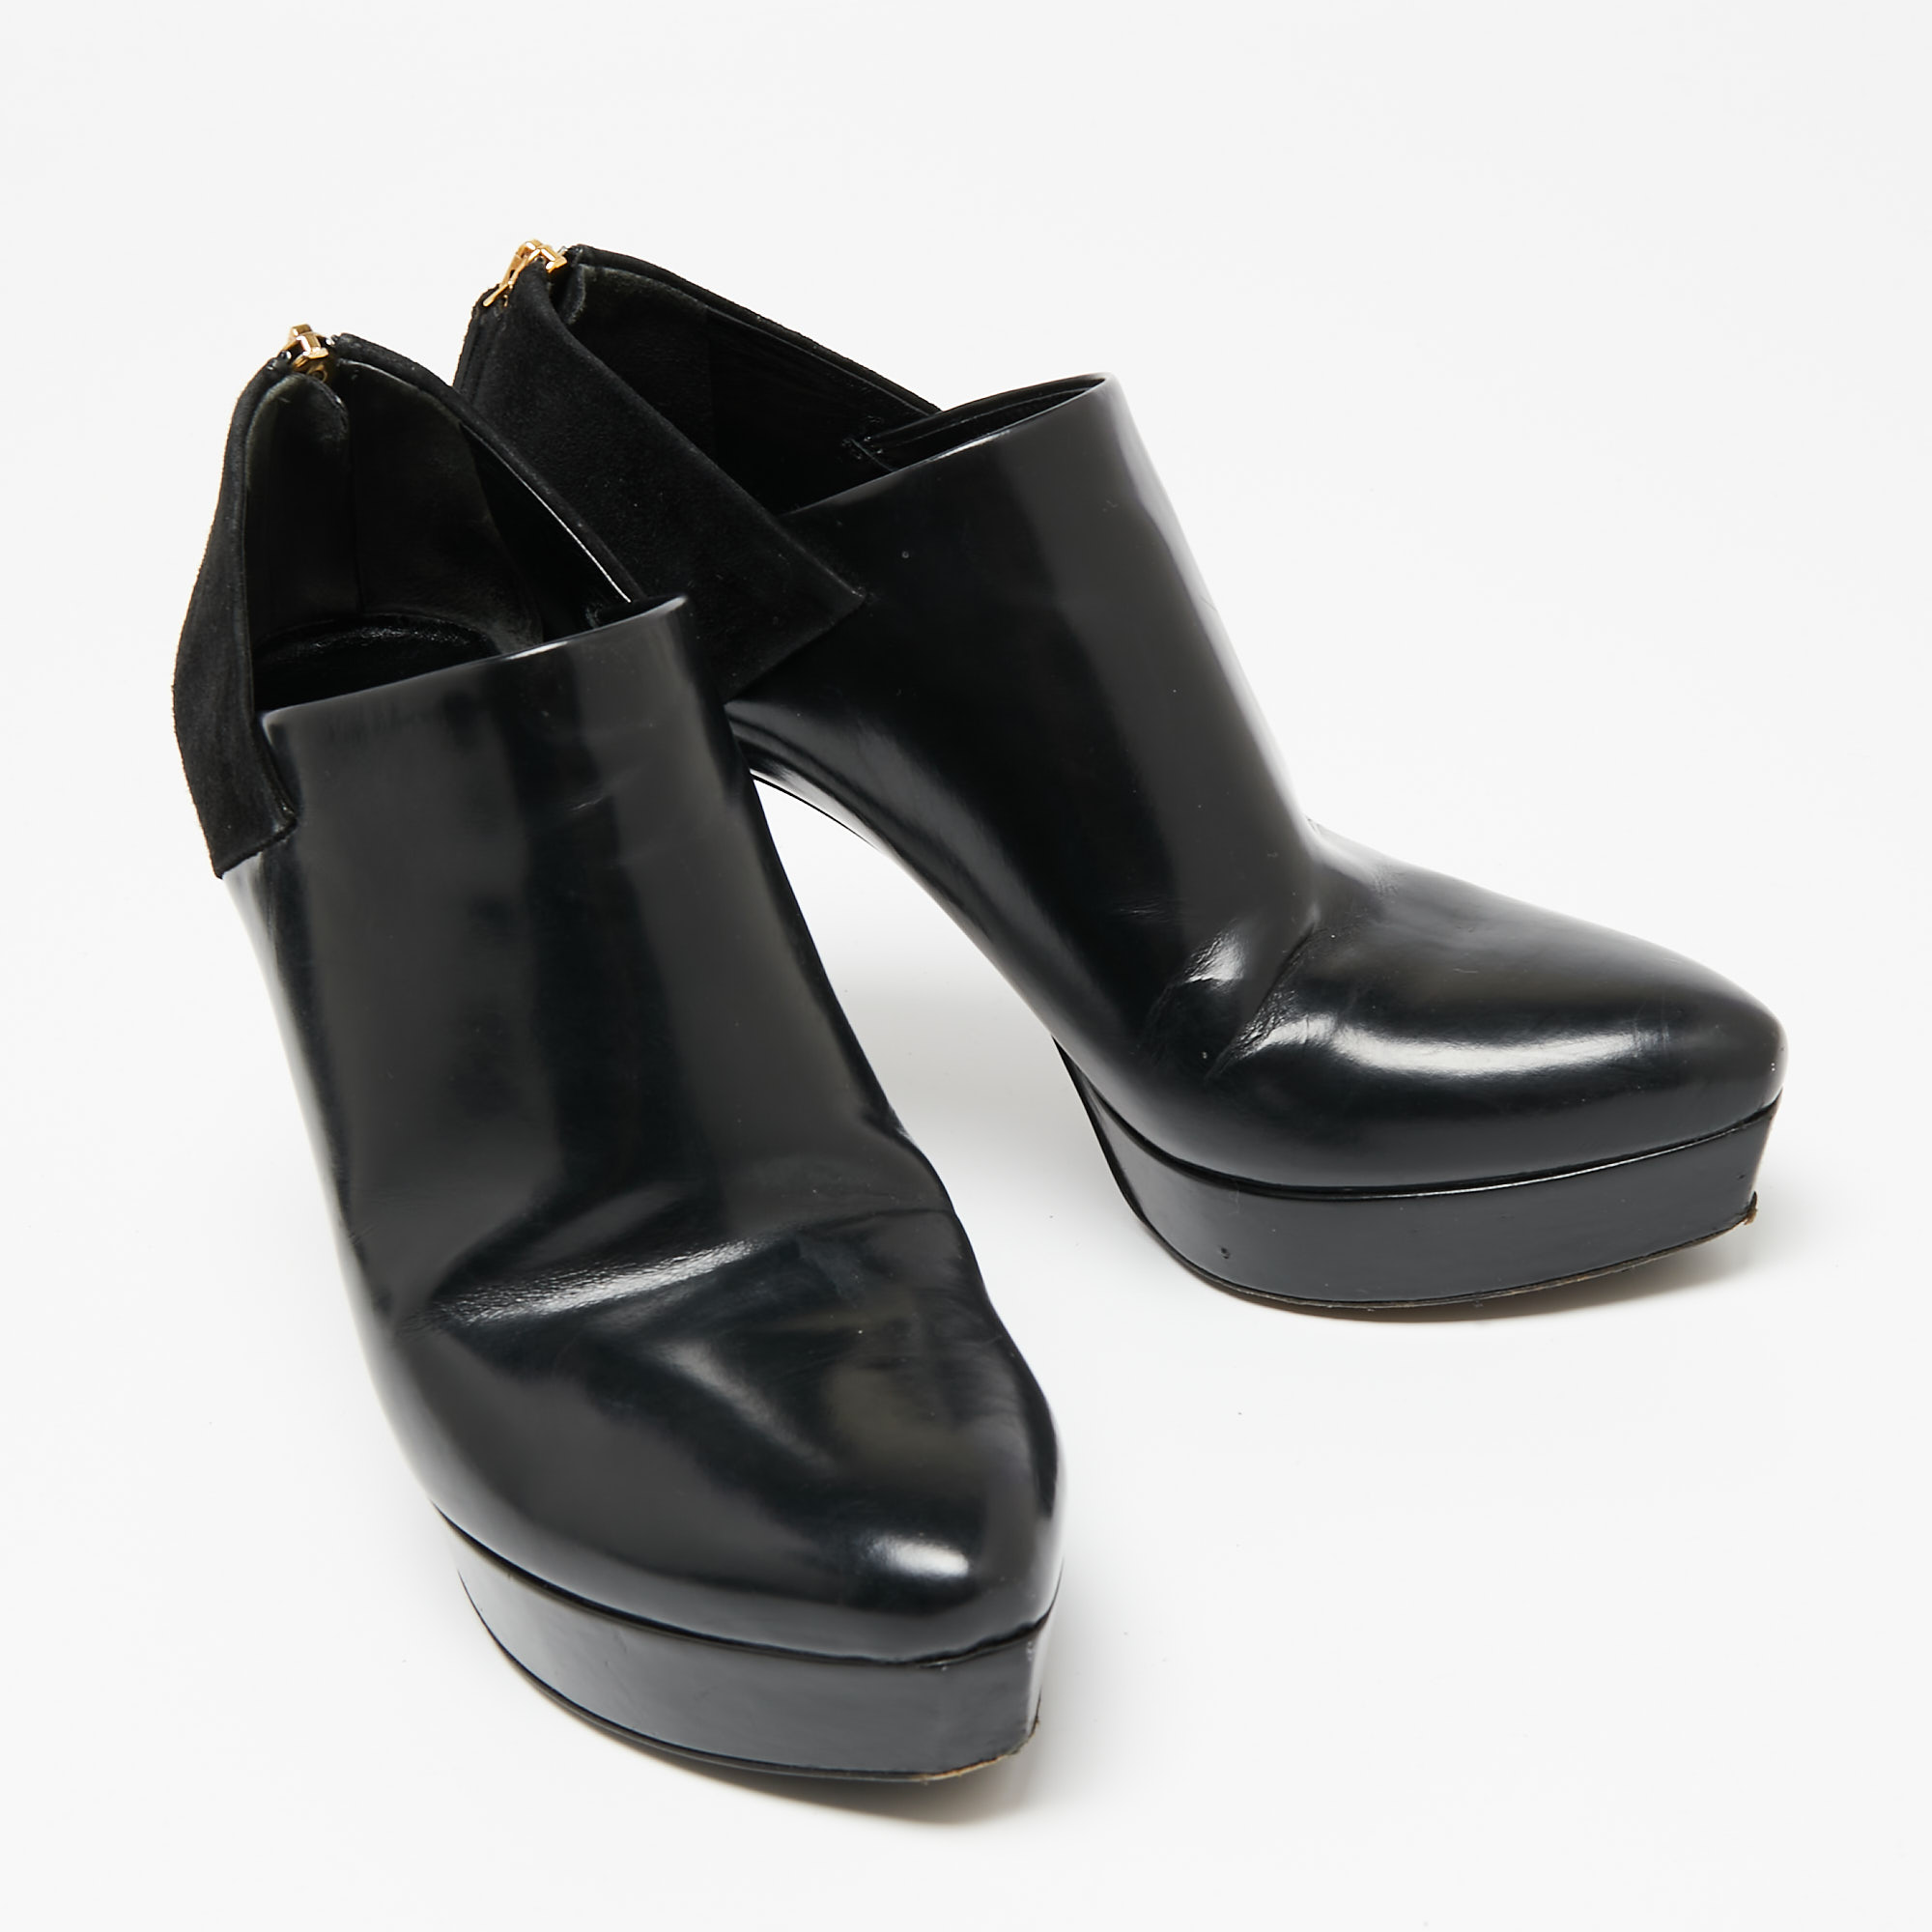 Gucci  Black Suede And Patent Leather Booties Size 37.5